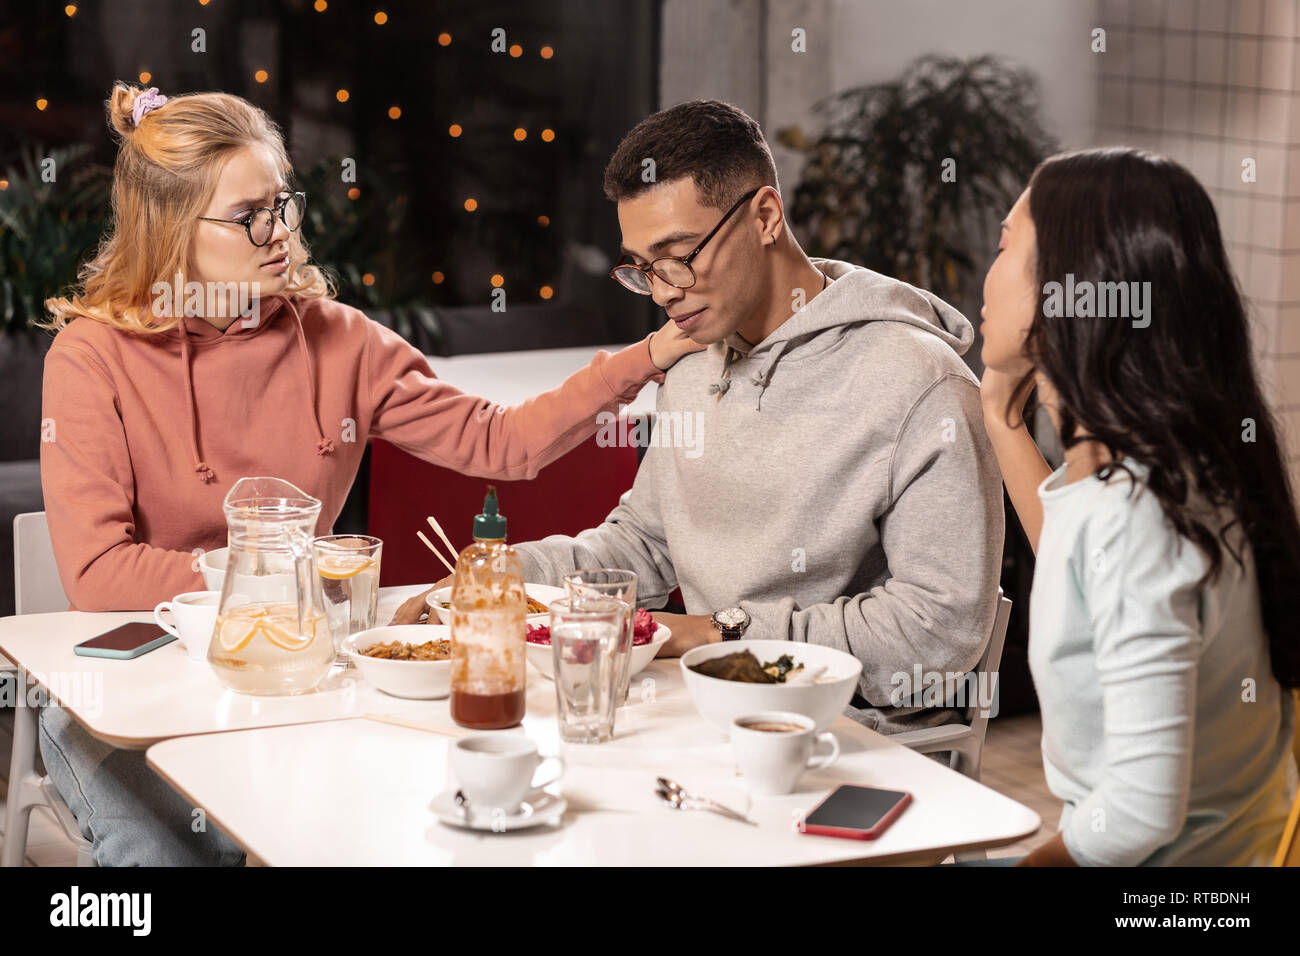 Adorable girls trying to comfort guy by making photos with him. Stock Photo